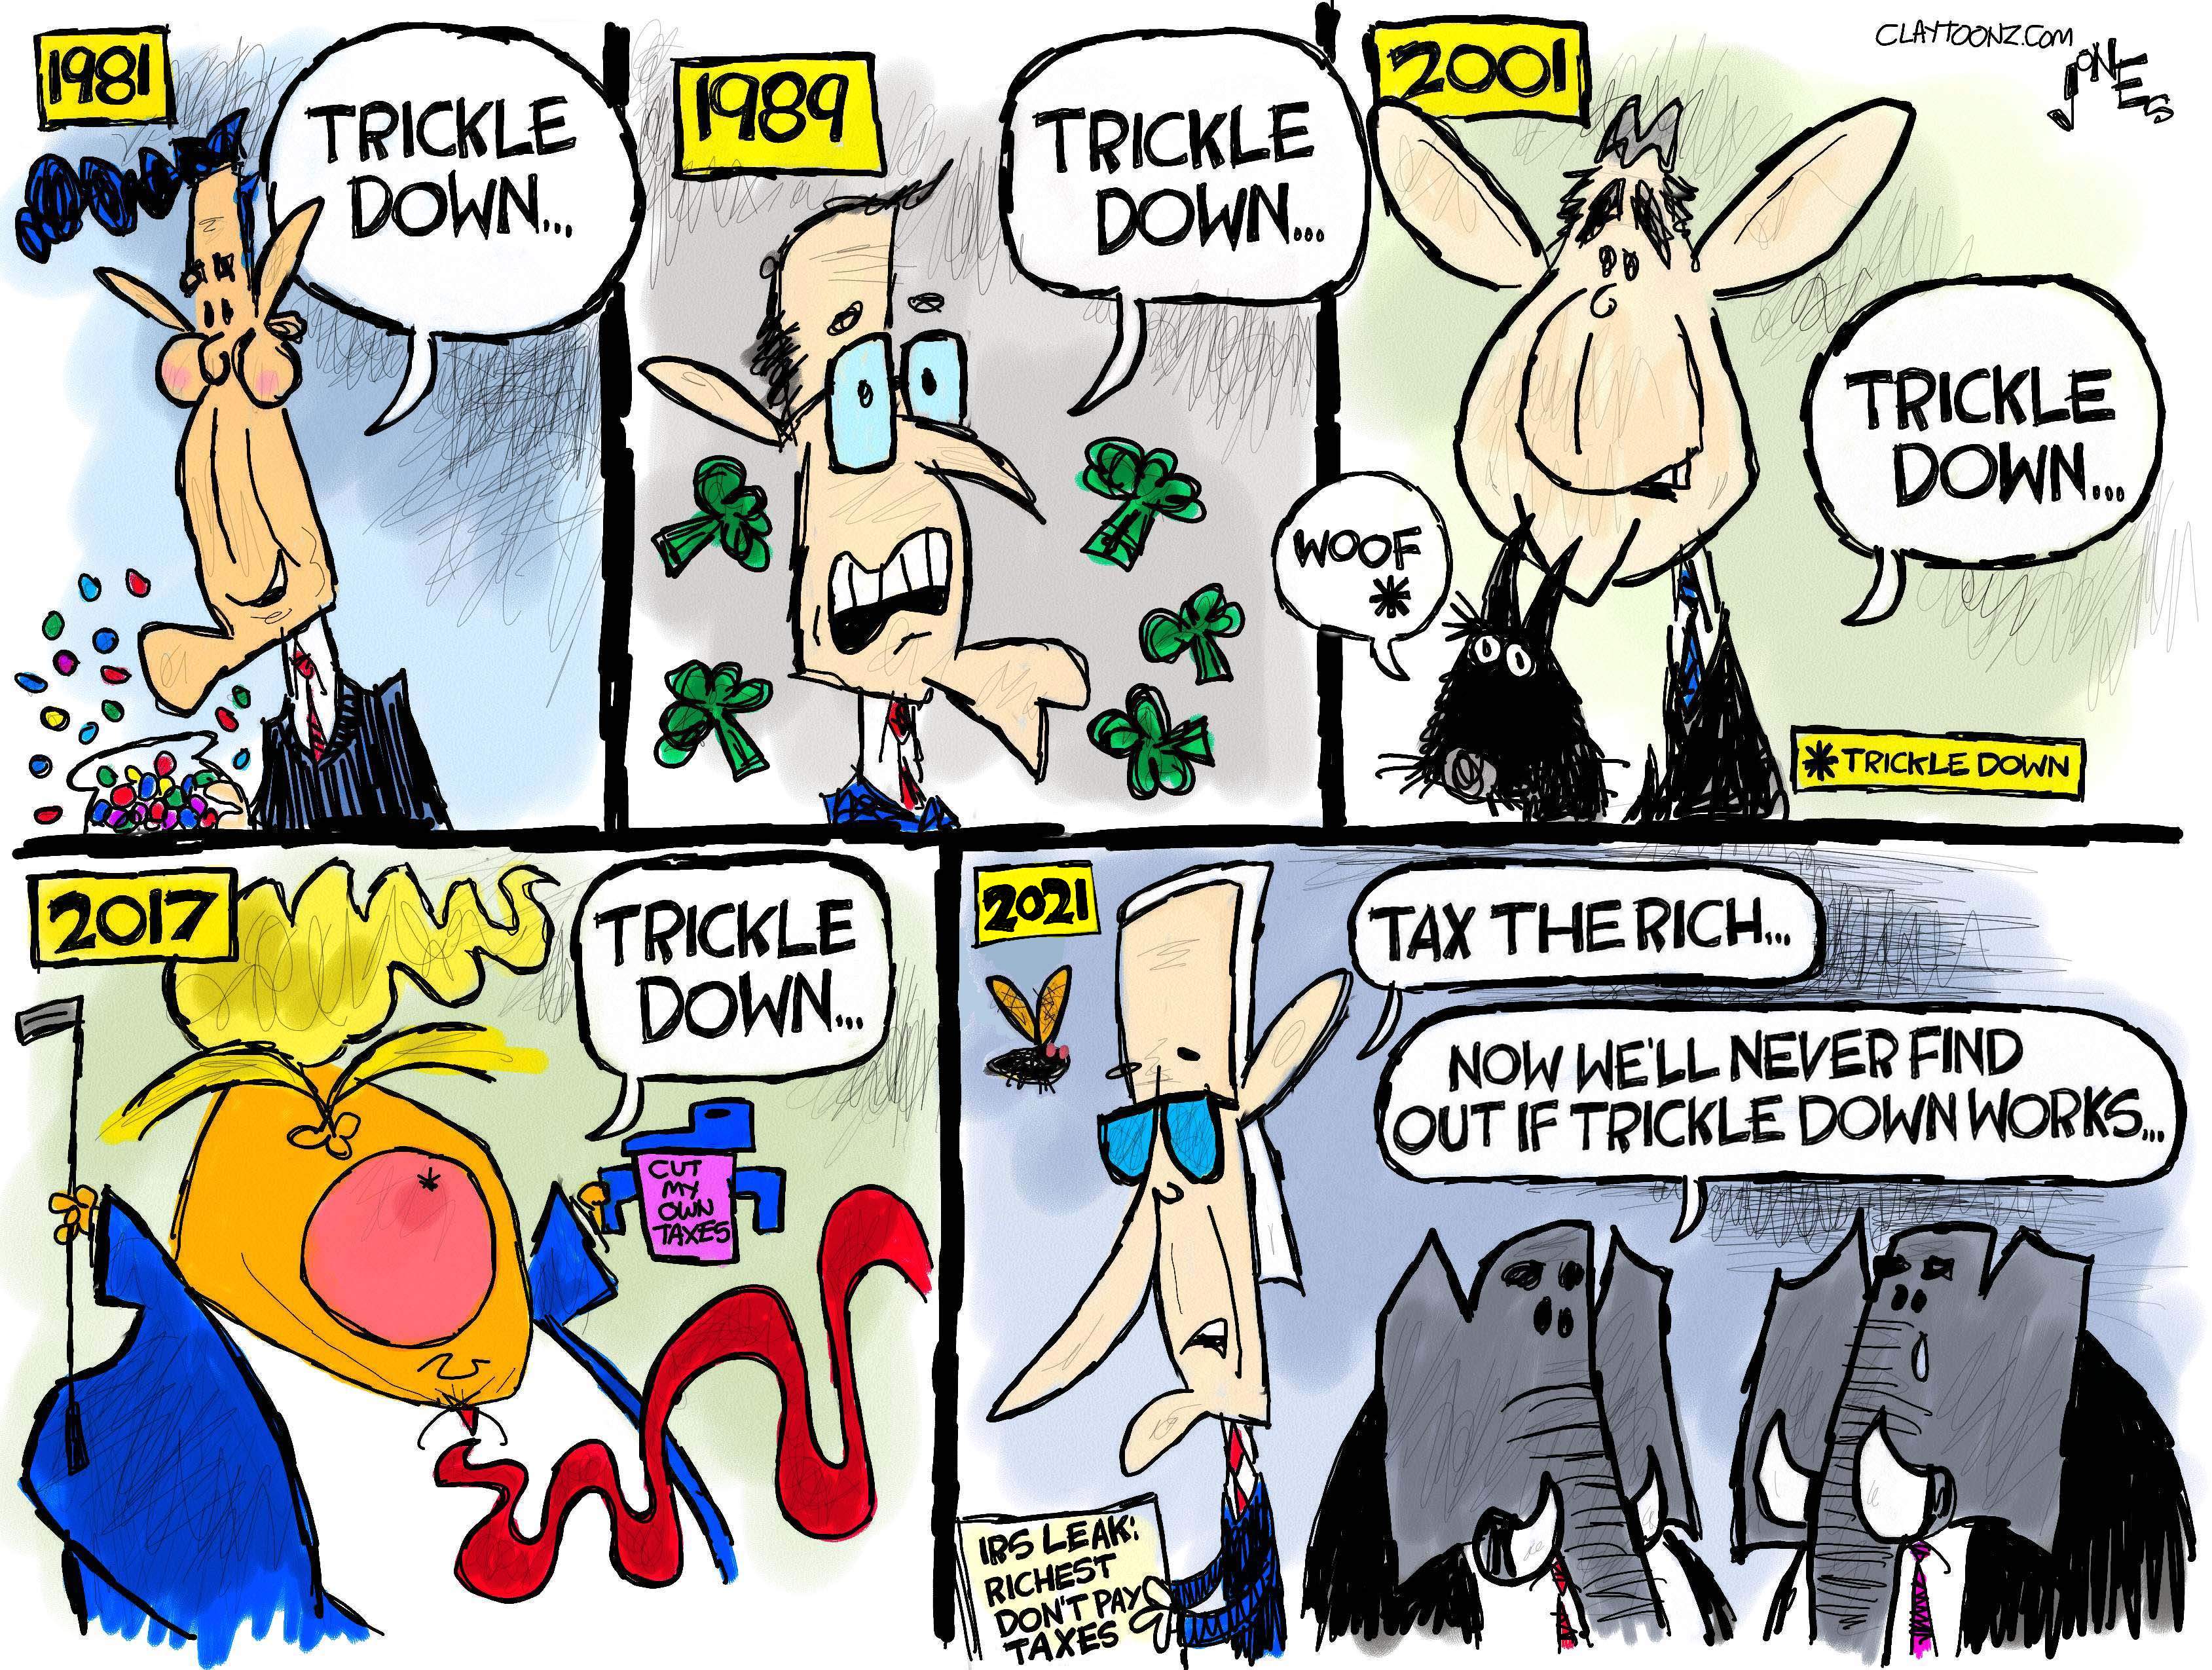 Trickle-down theories